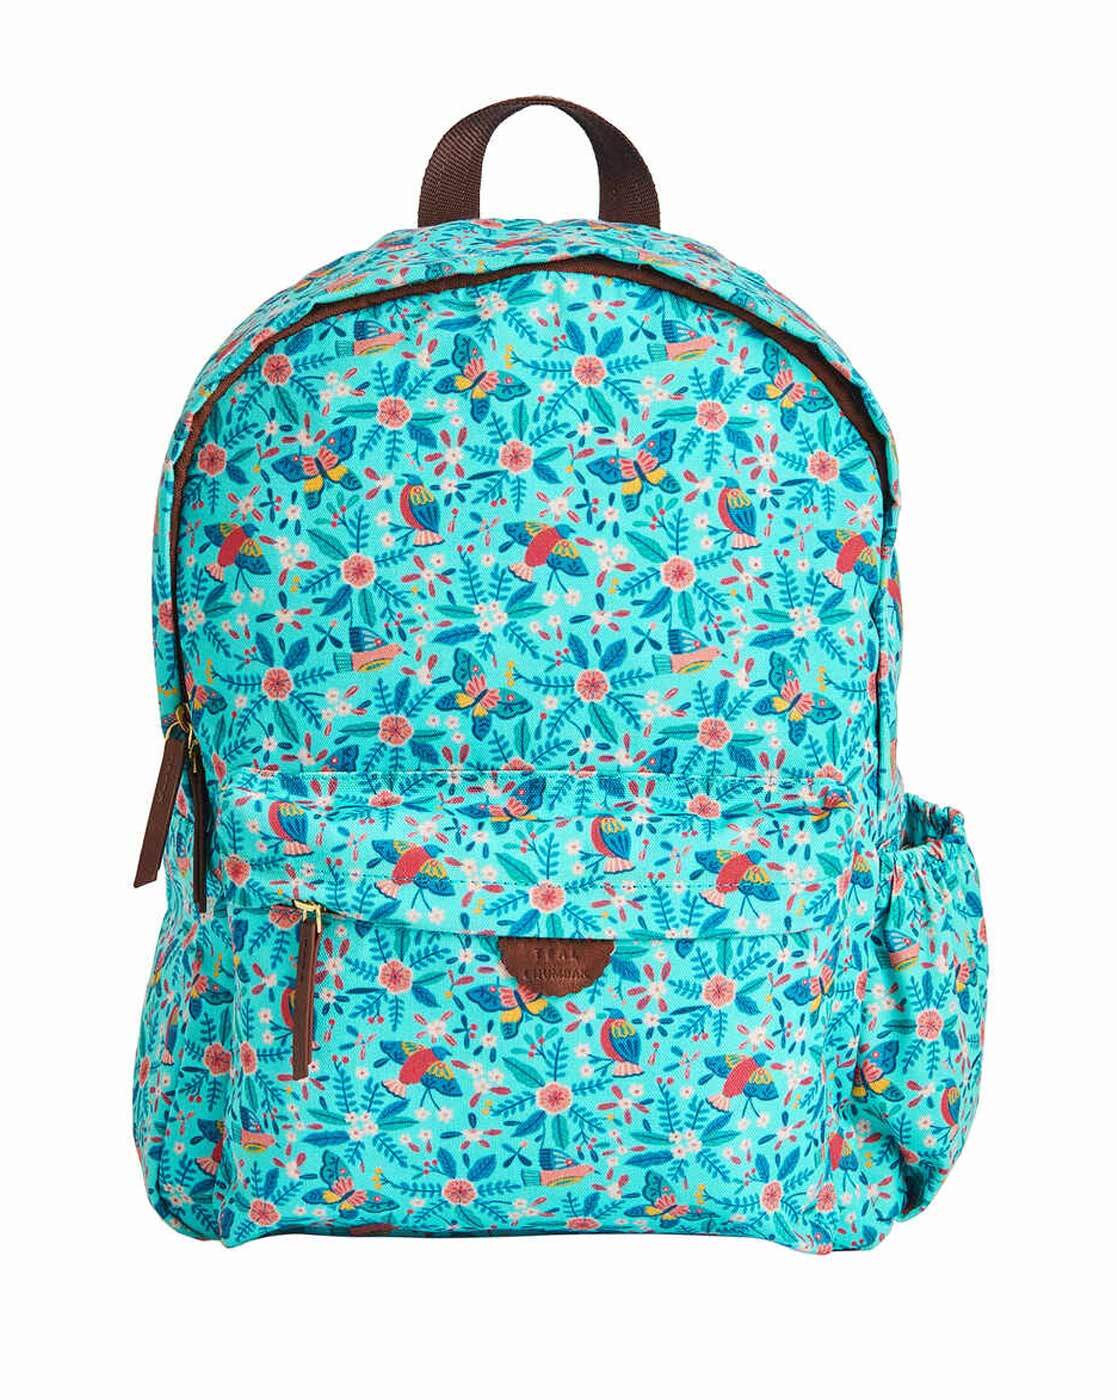 Buy Floral Backpacks Online In India - Etsy India